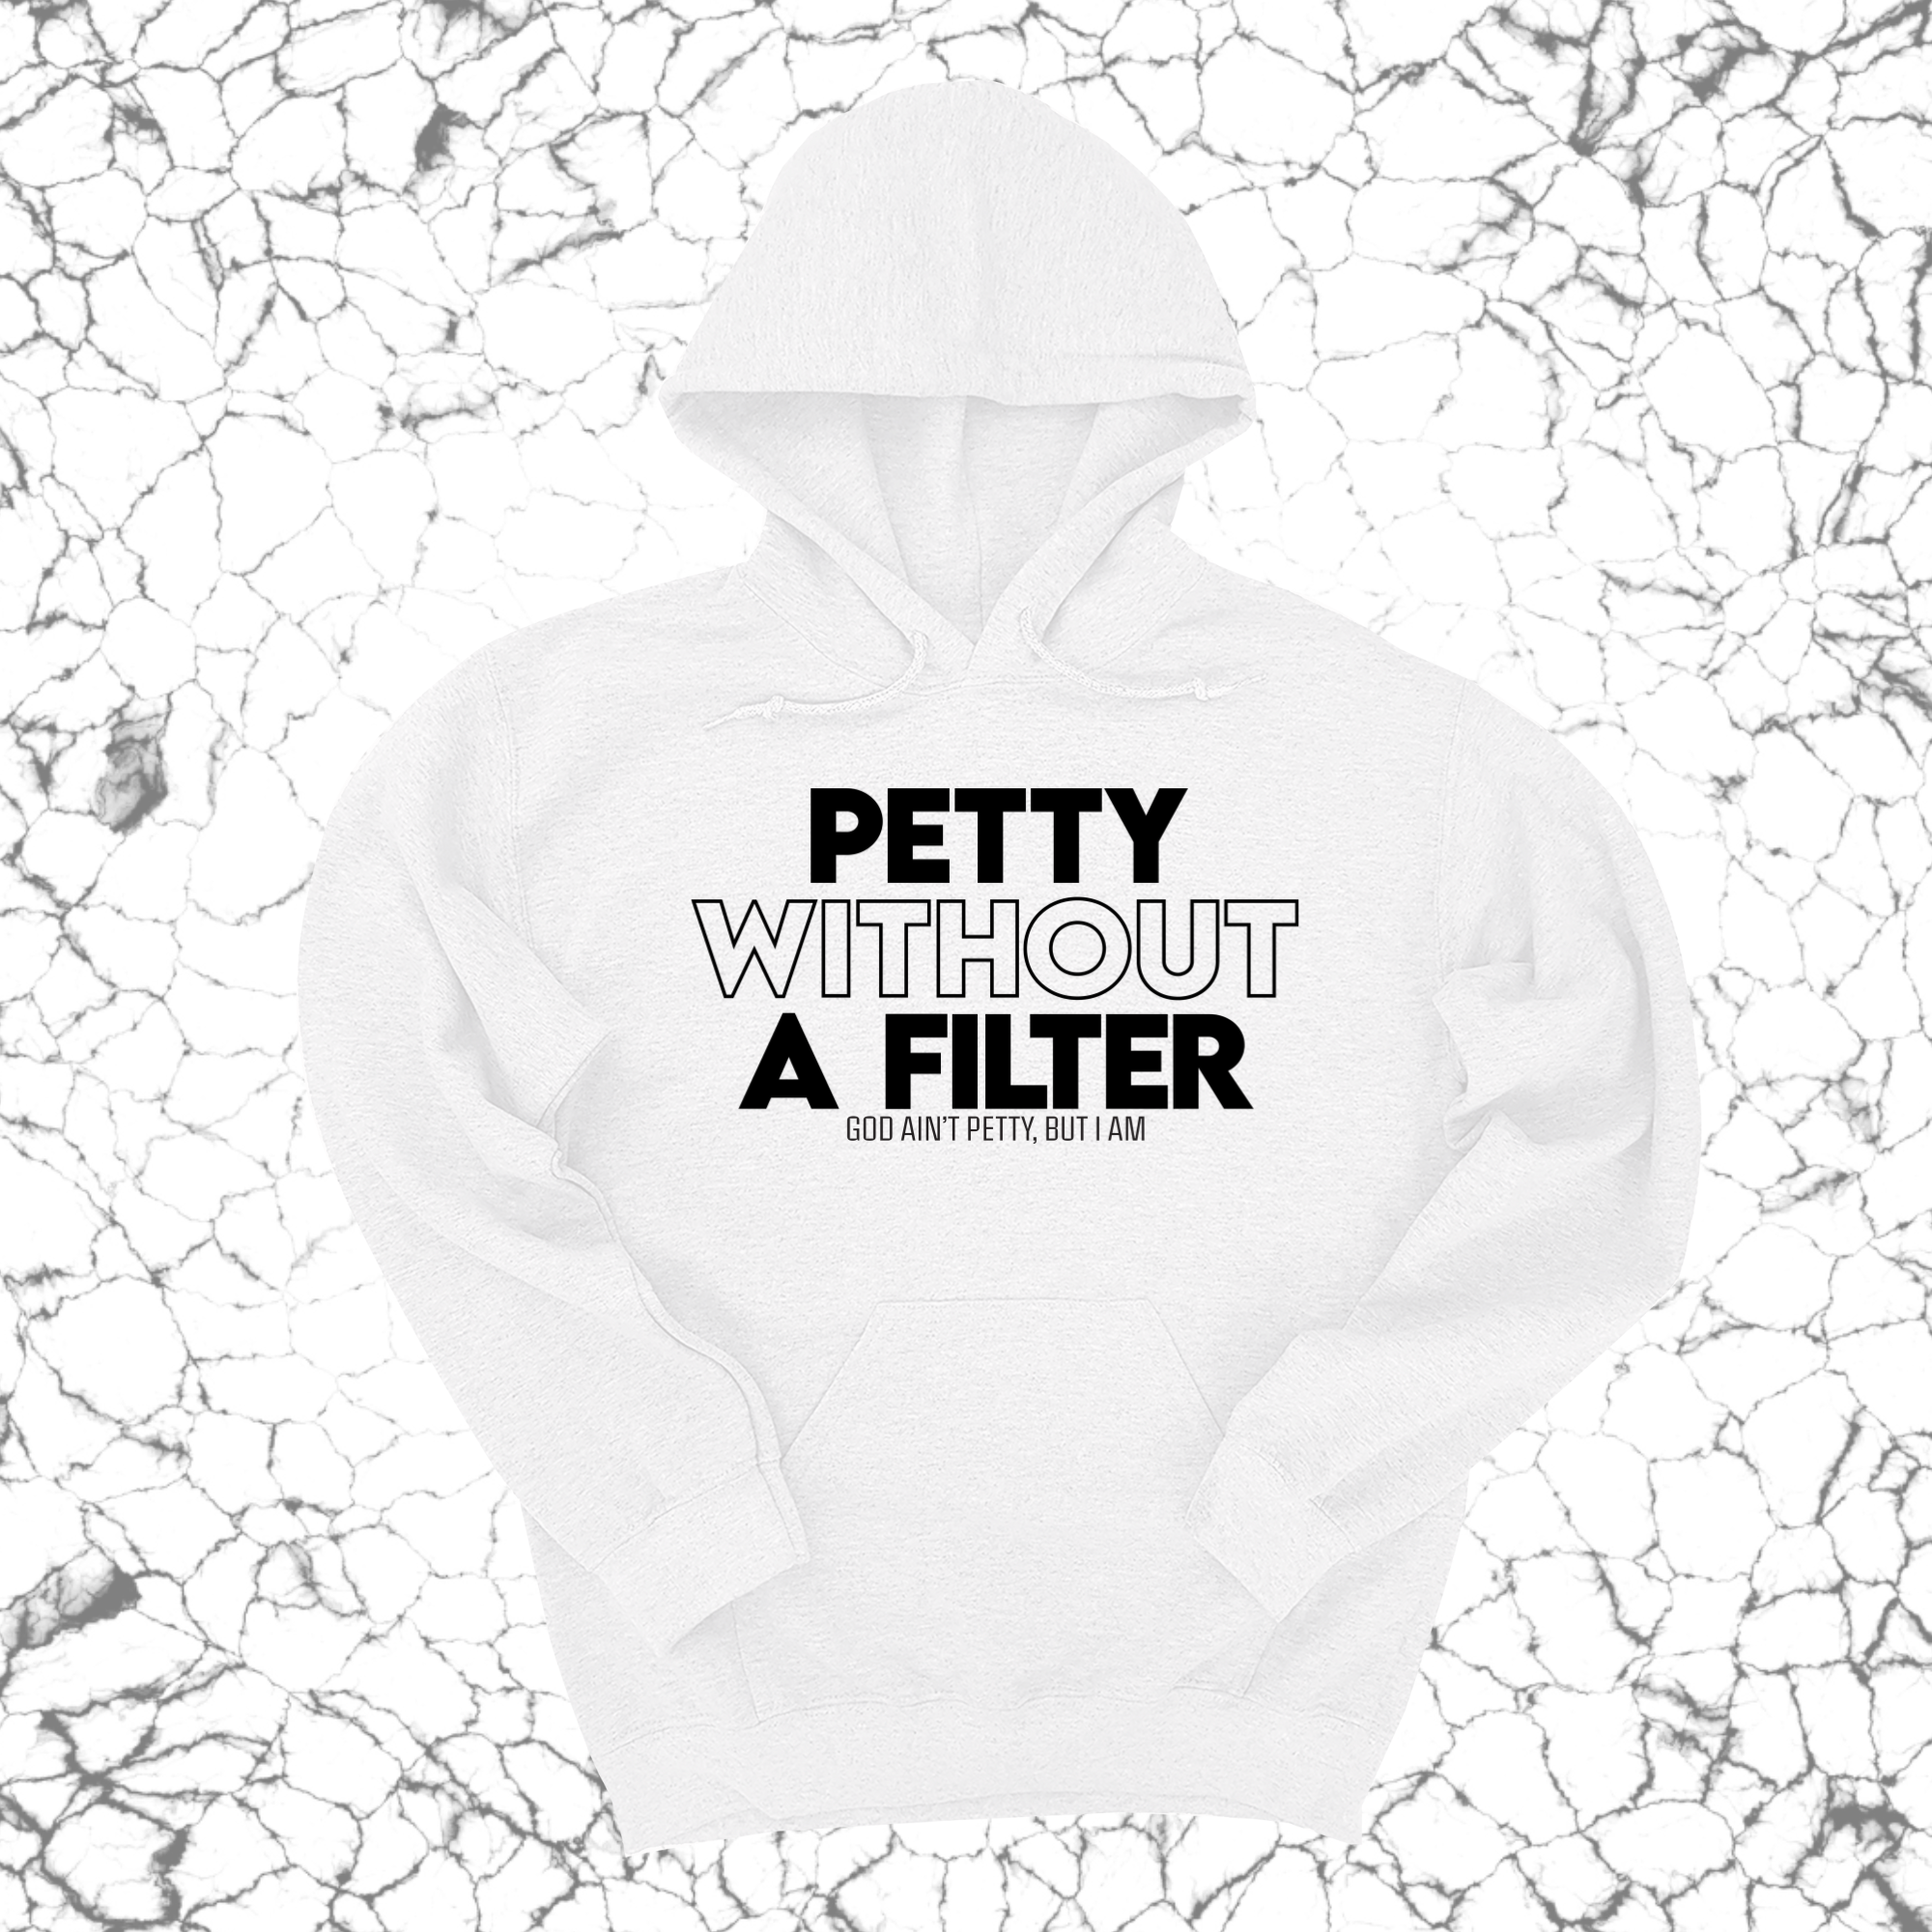 Petty without a Filter Unisex Hoodie-Hoodie-The Original God Ain't Petty But I Am